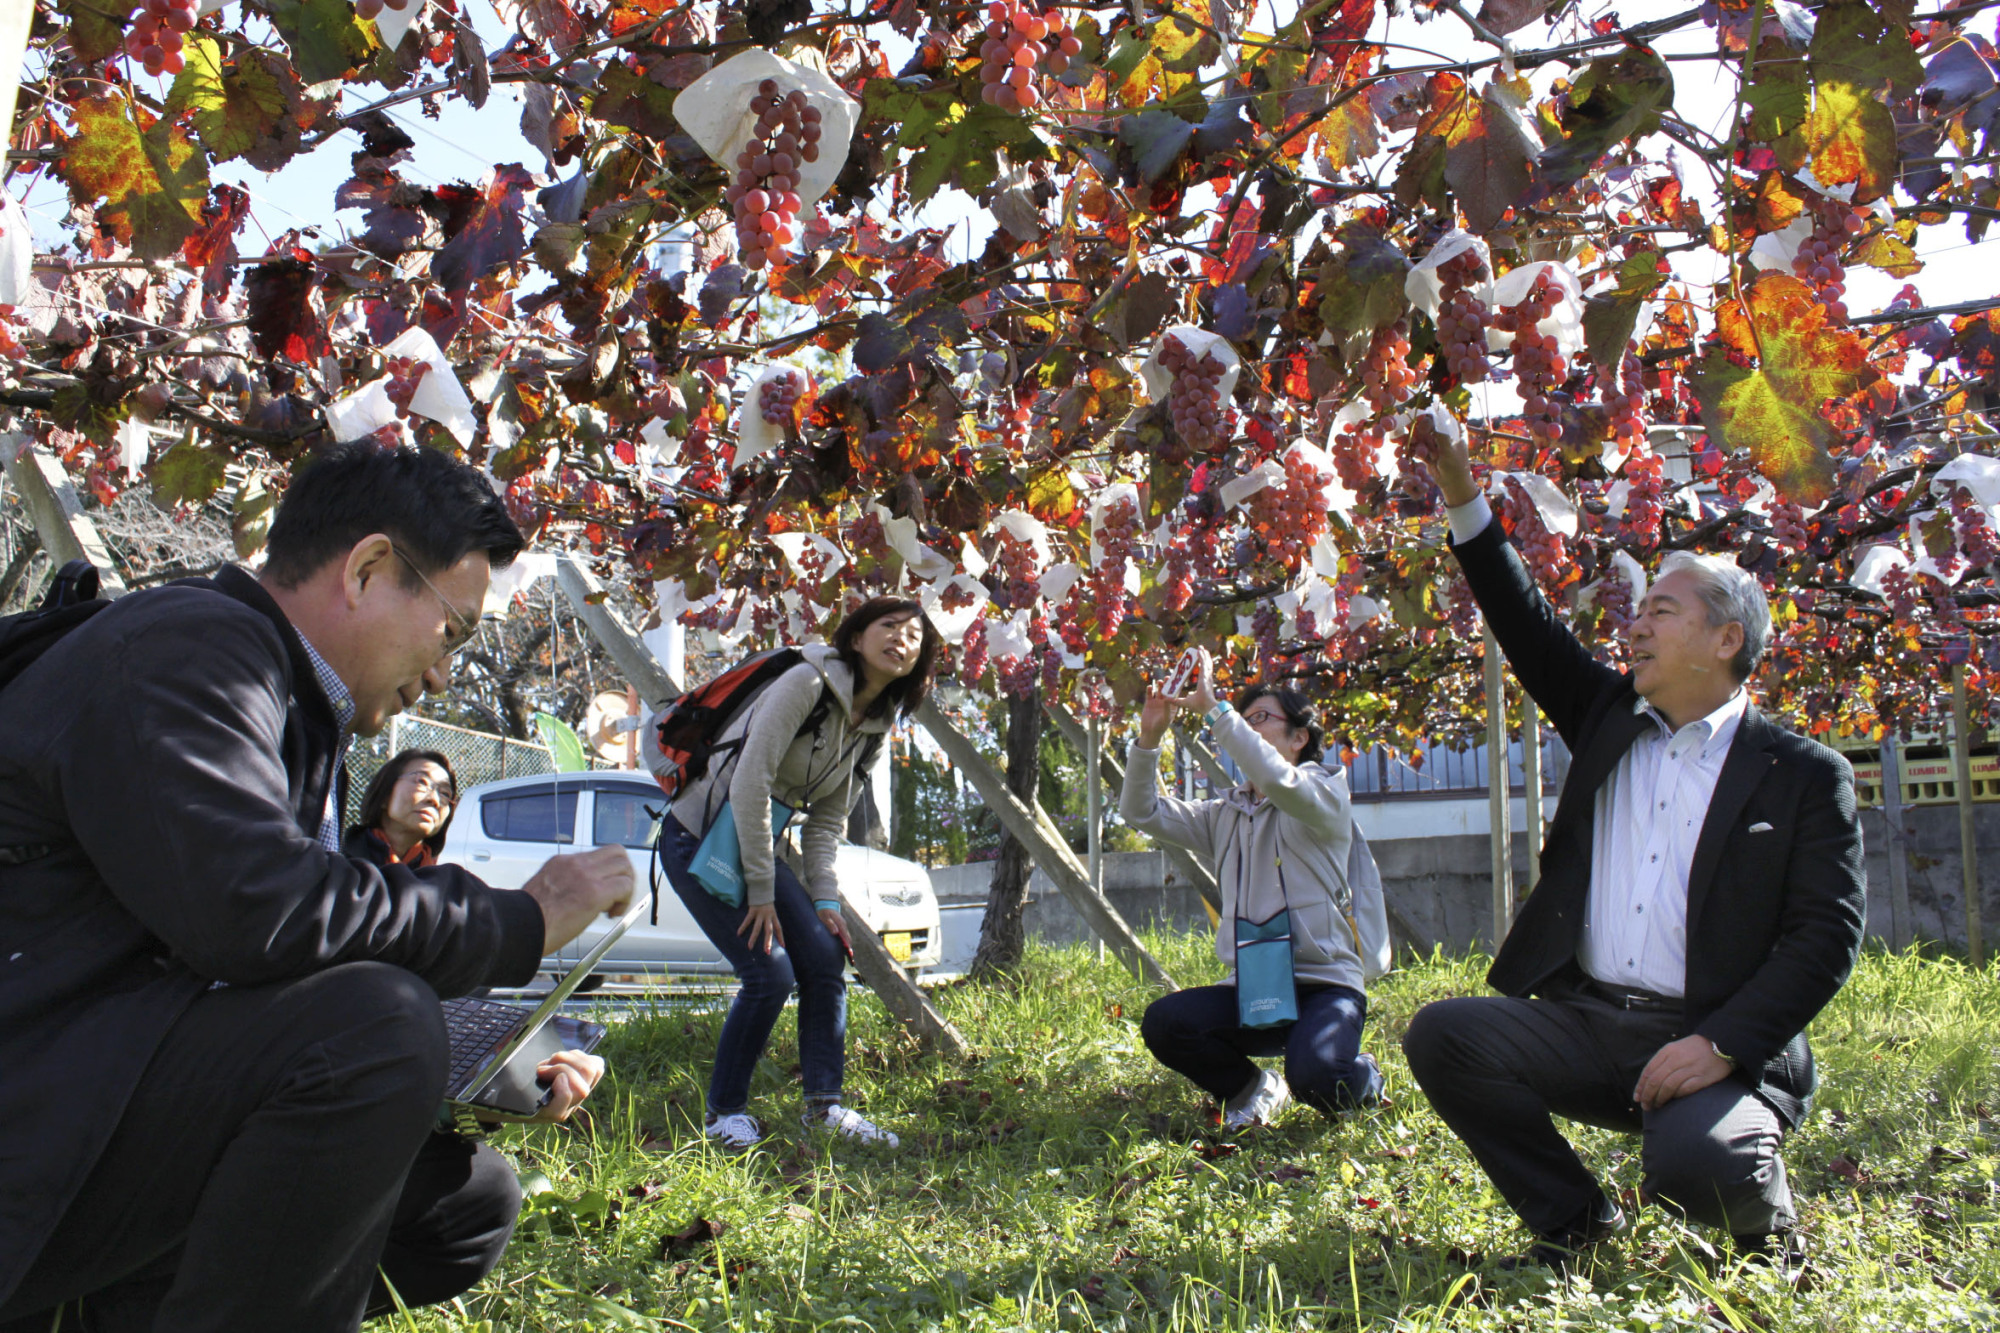 Visitors examine Koshu grapes last month at a winery in Fuefuki, Yamanashi Prefecture. Japanese winemakers hope to expand exports after a free trade agreement between Japan and the European Union enters into force in February. | KYODO